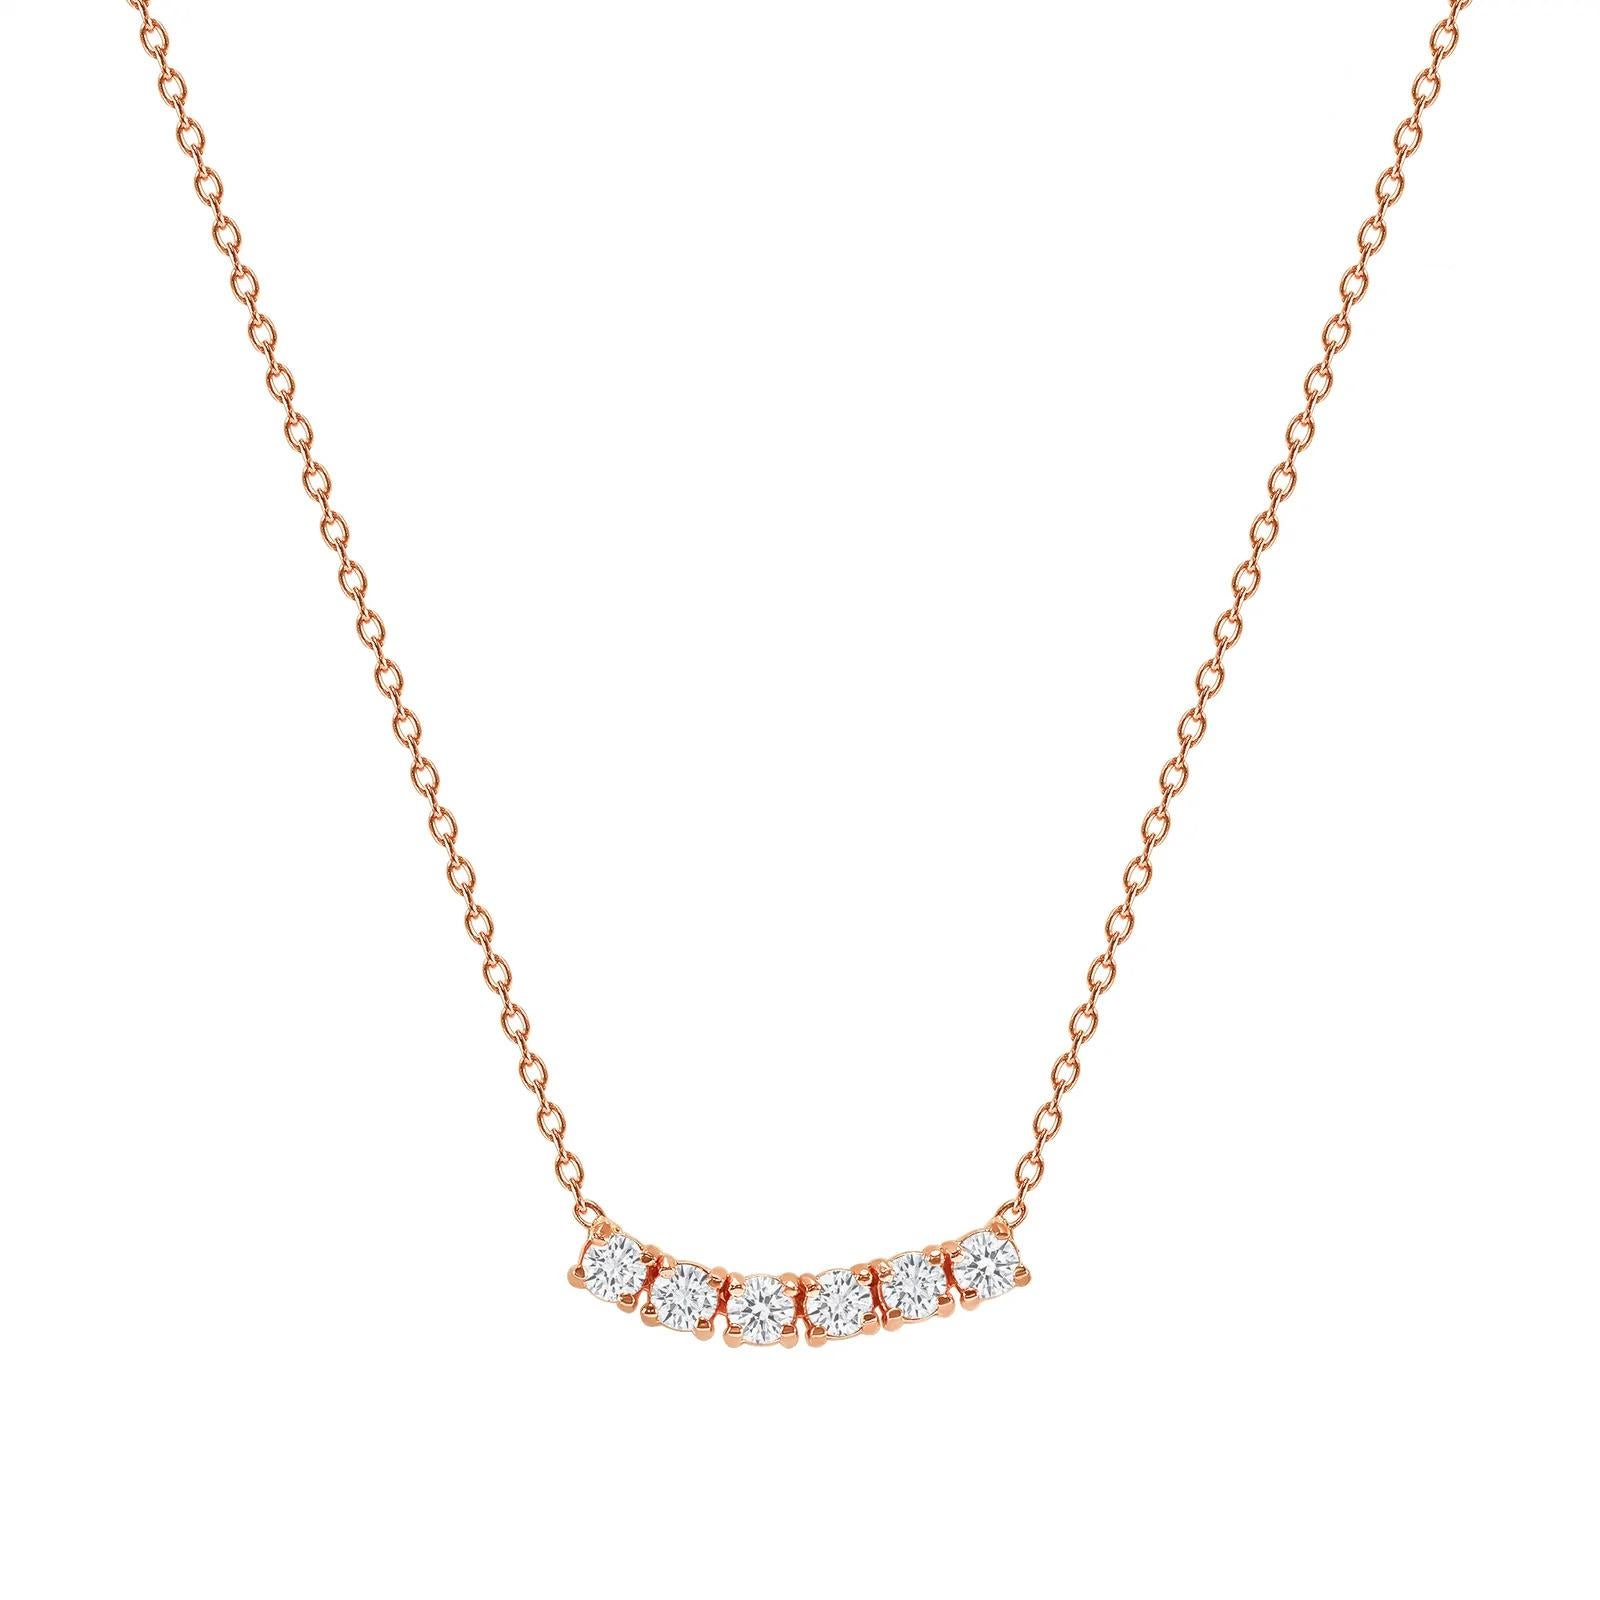 This petite, curved diamond necklace is crafted with gorgeous 14k gold set with six round diamonds.  

Gold: 14k 
Diamond Total Carats: 1 ct
Diamond Cut: Round (6 diamonds)
Diamond Clarity: VS
Diamond Color: F
Color: Rose Gold
Necklace Length: 22